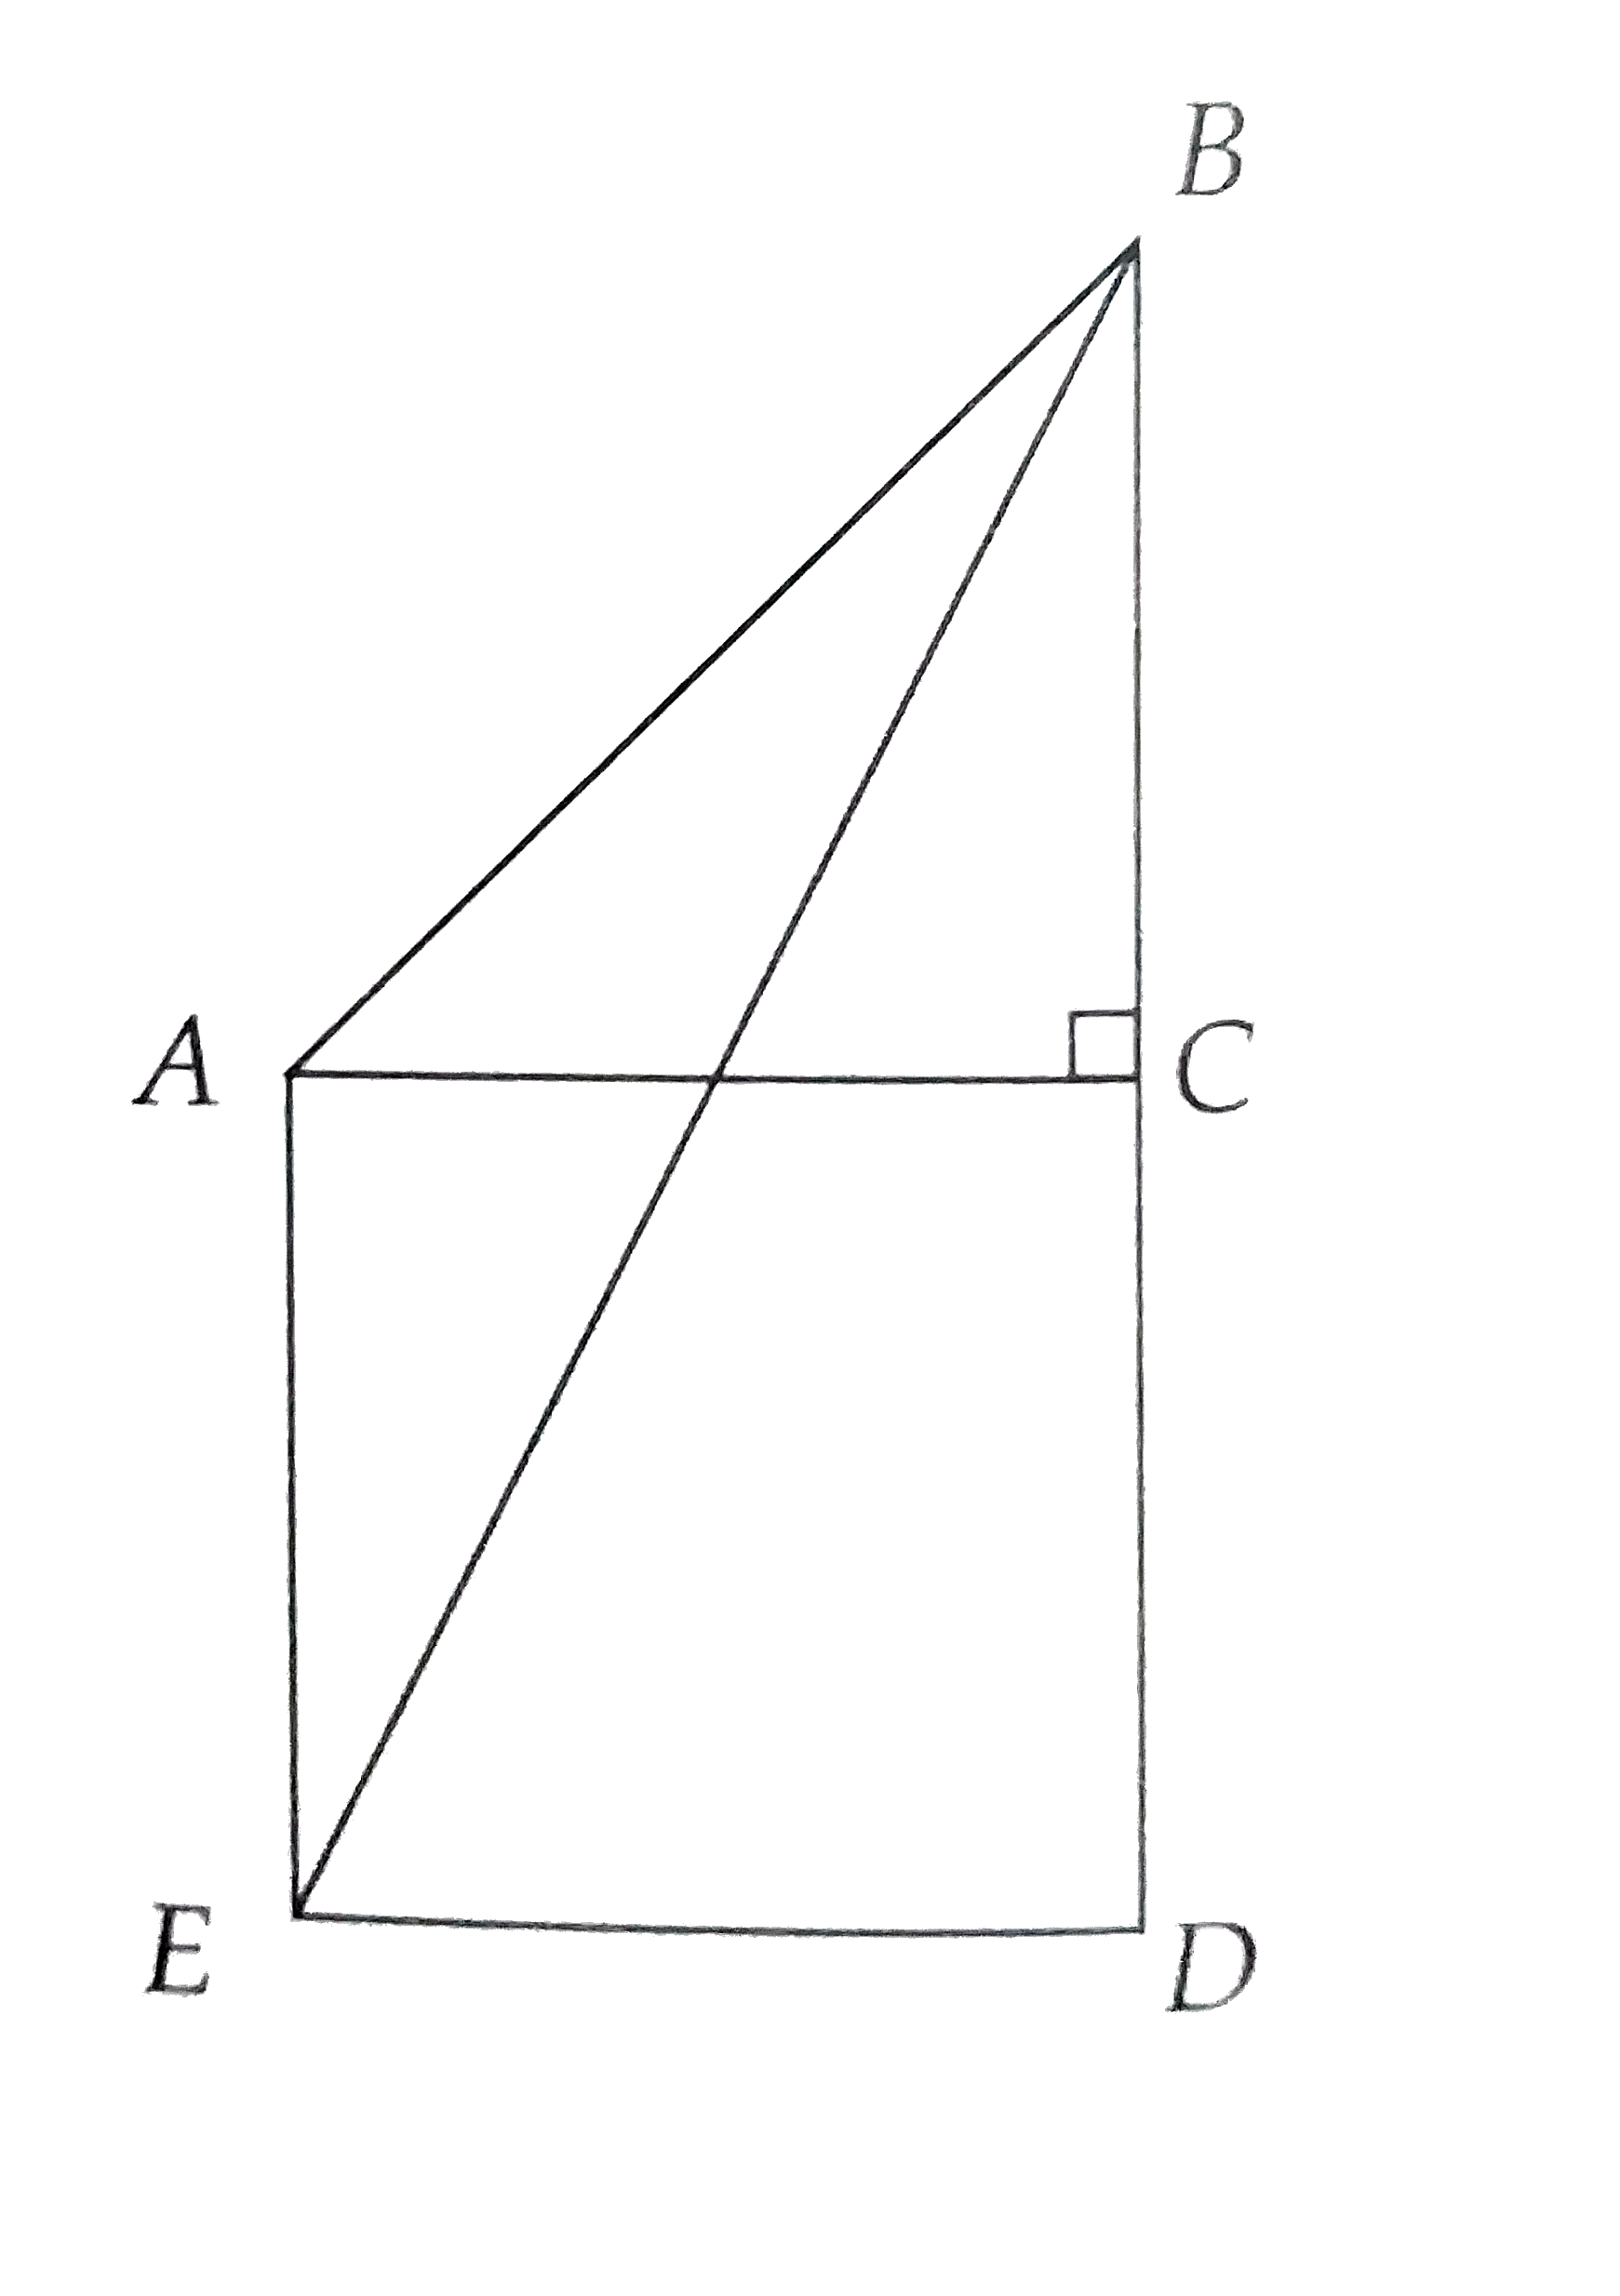 If isosceles right triangle ABC and square ACDE share side AC, what is the degree measure of angle EBC ?